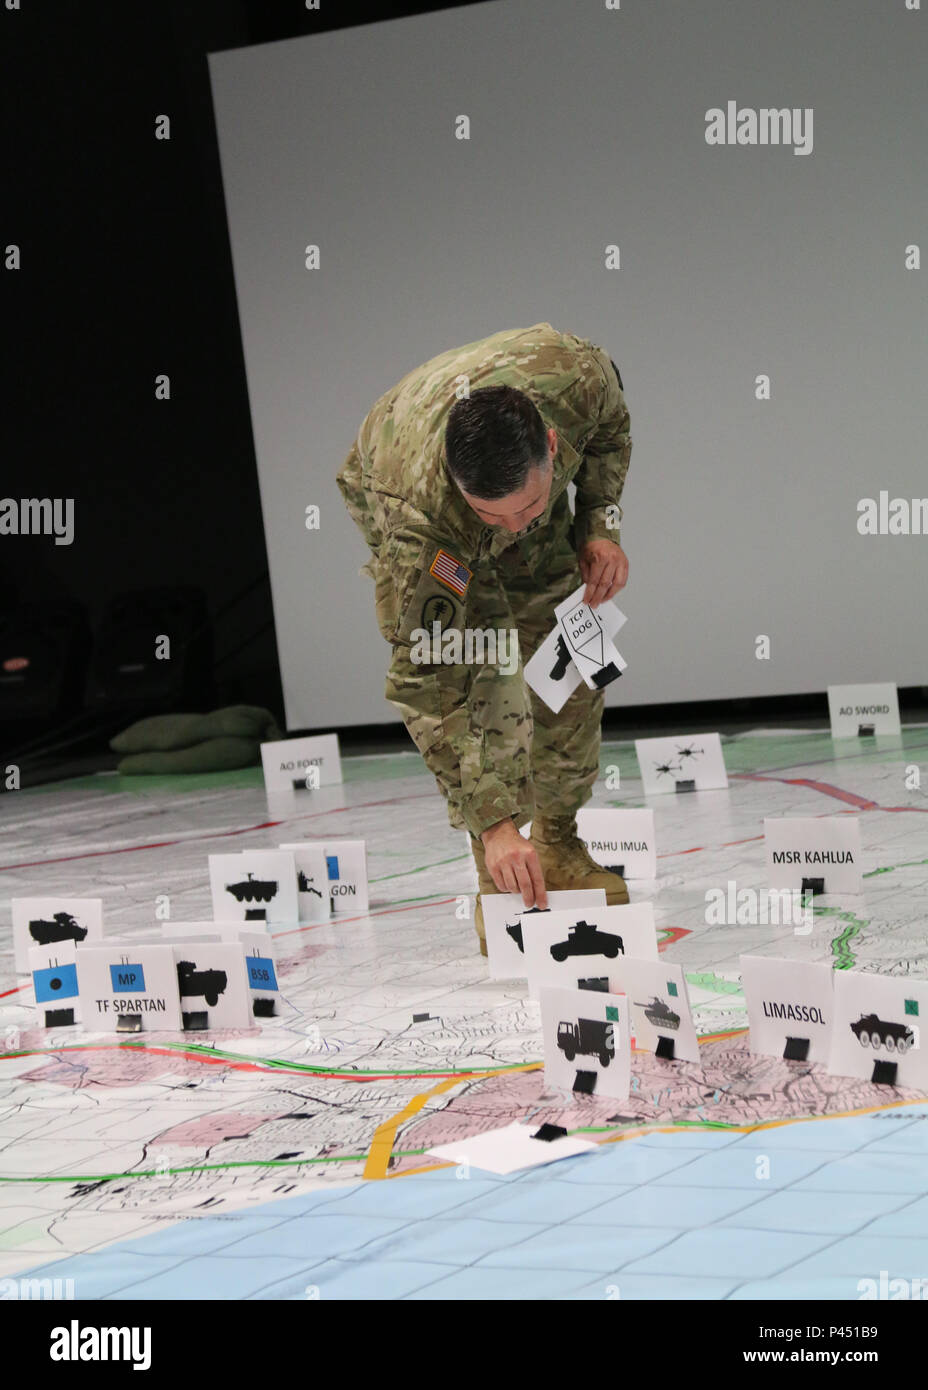 Cpt. Mark Franzen, operations officer, 530th Military Police Battalion, places an image on a simulated training map during exercise Imua Dawn16 rehearsal of concept drill, Sagamihara Depot, Japan, June 14, 2016.  This year’s Imua Dawn 16 exercise focuses on maneuver support operations and enhancing cooperative capabilities in mobility, humanitarian assistance and disaster relief and sustainment support in the event of natural disasters and other crises that threaten public safety and health. Exercises such as Imua Dawn16 are fundamental training opportunities for military forces to refine tech Stock Photo